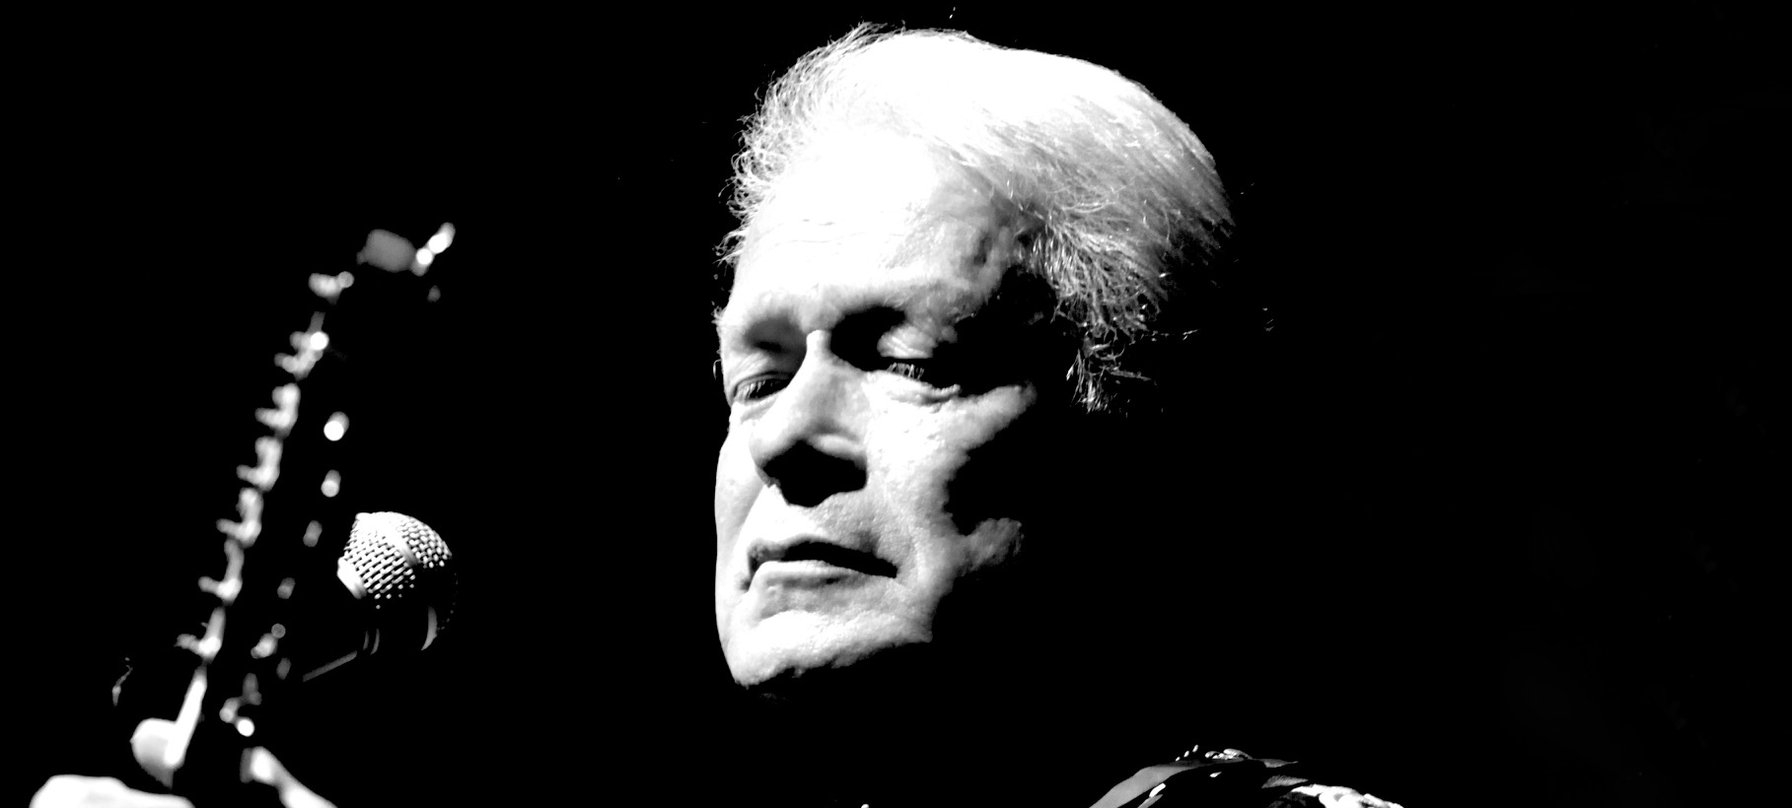 A black and white photo of Keith Potger performing with his guitar. Keith wears an intricutely embroidered Western shirt, has white hair and pale skin. He looks down at the strings of his guitar as he plays. Credit